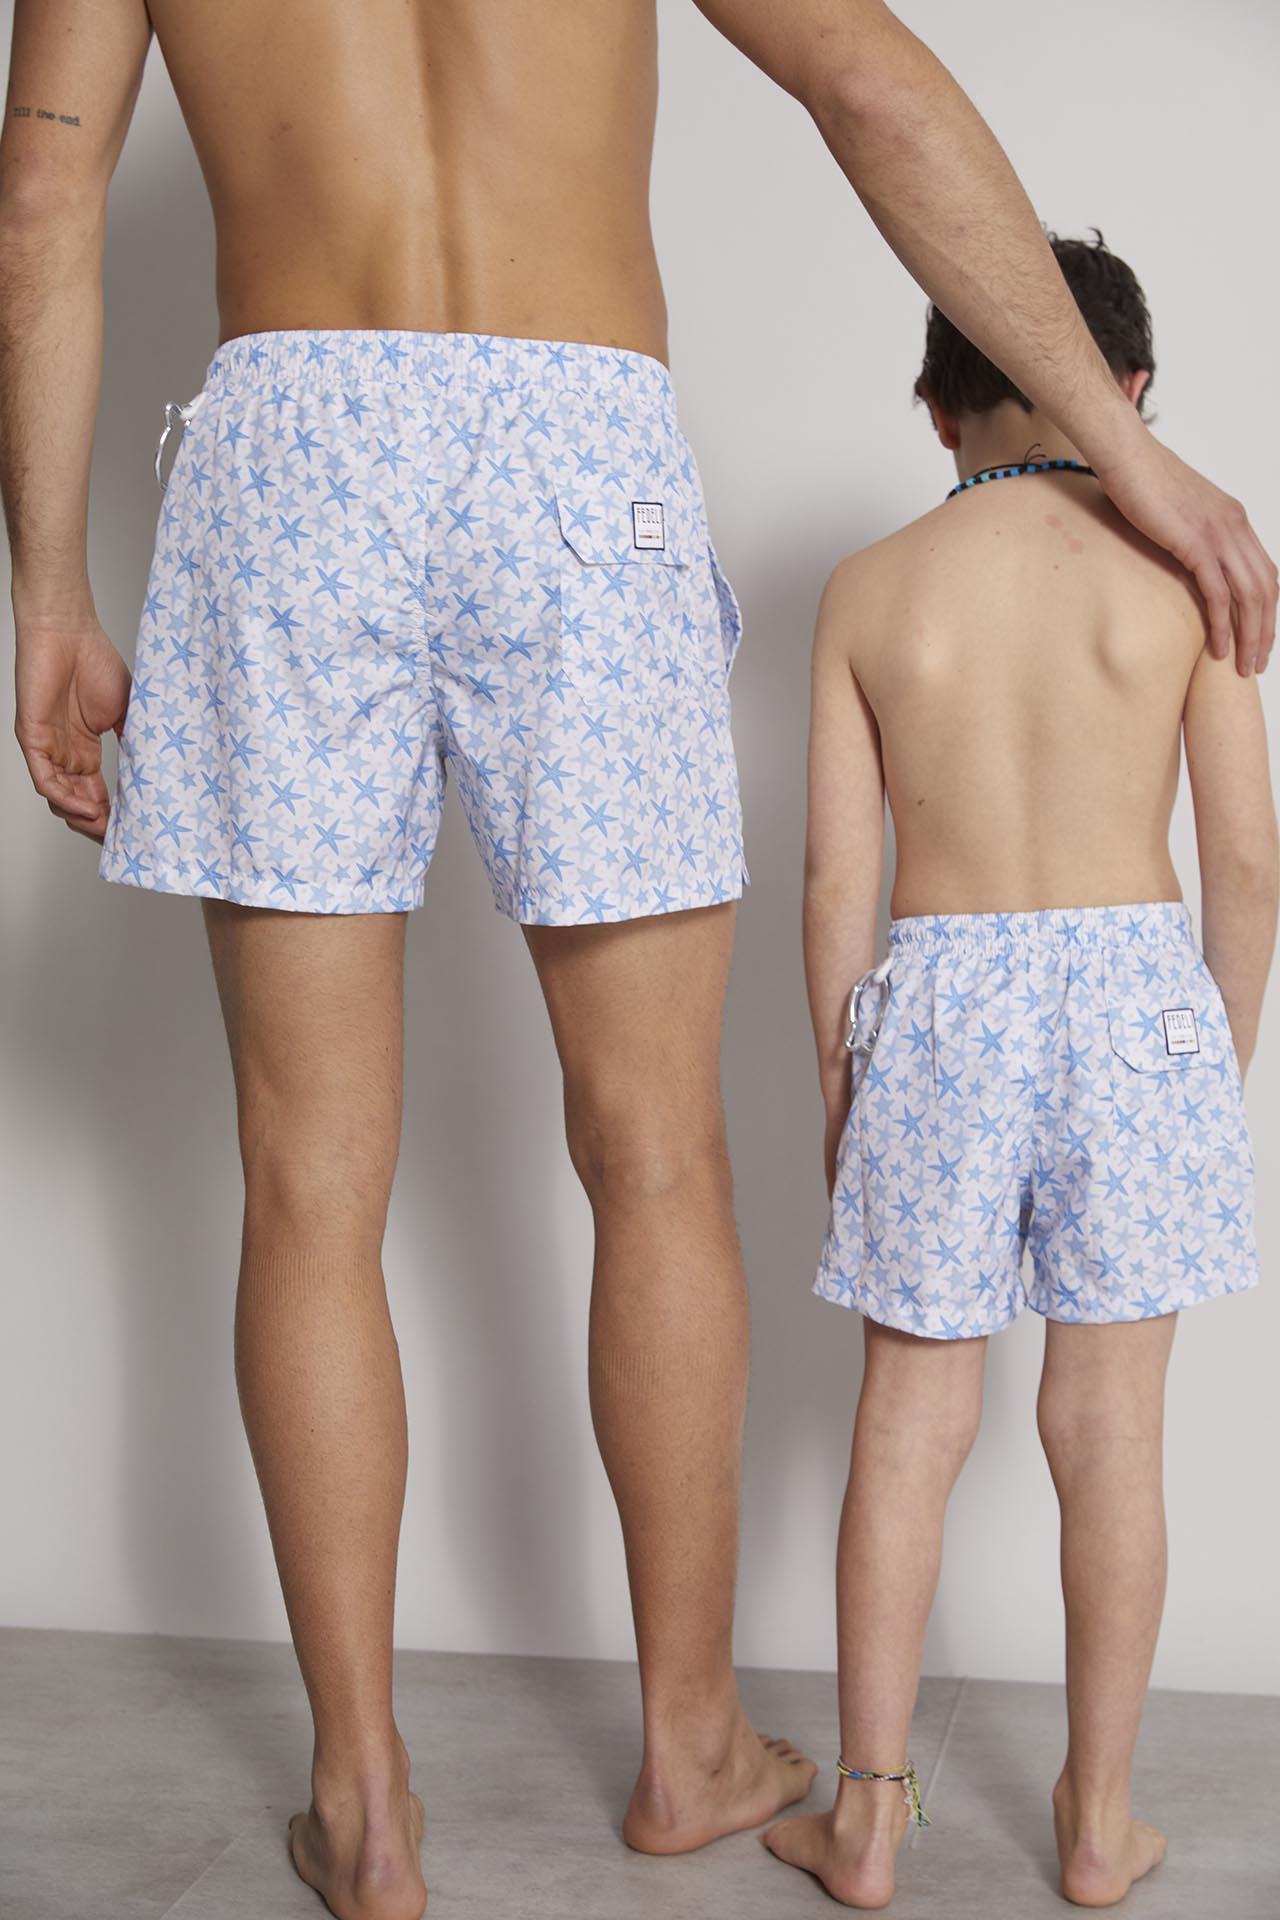 father and son matching swim trunks - blue star pattern 